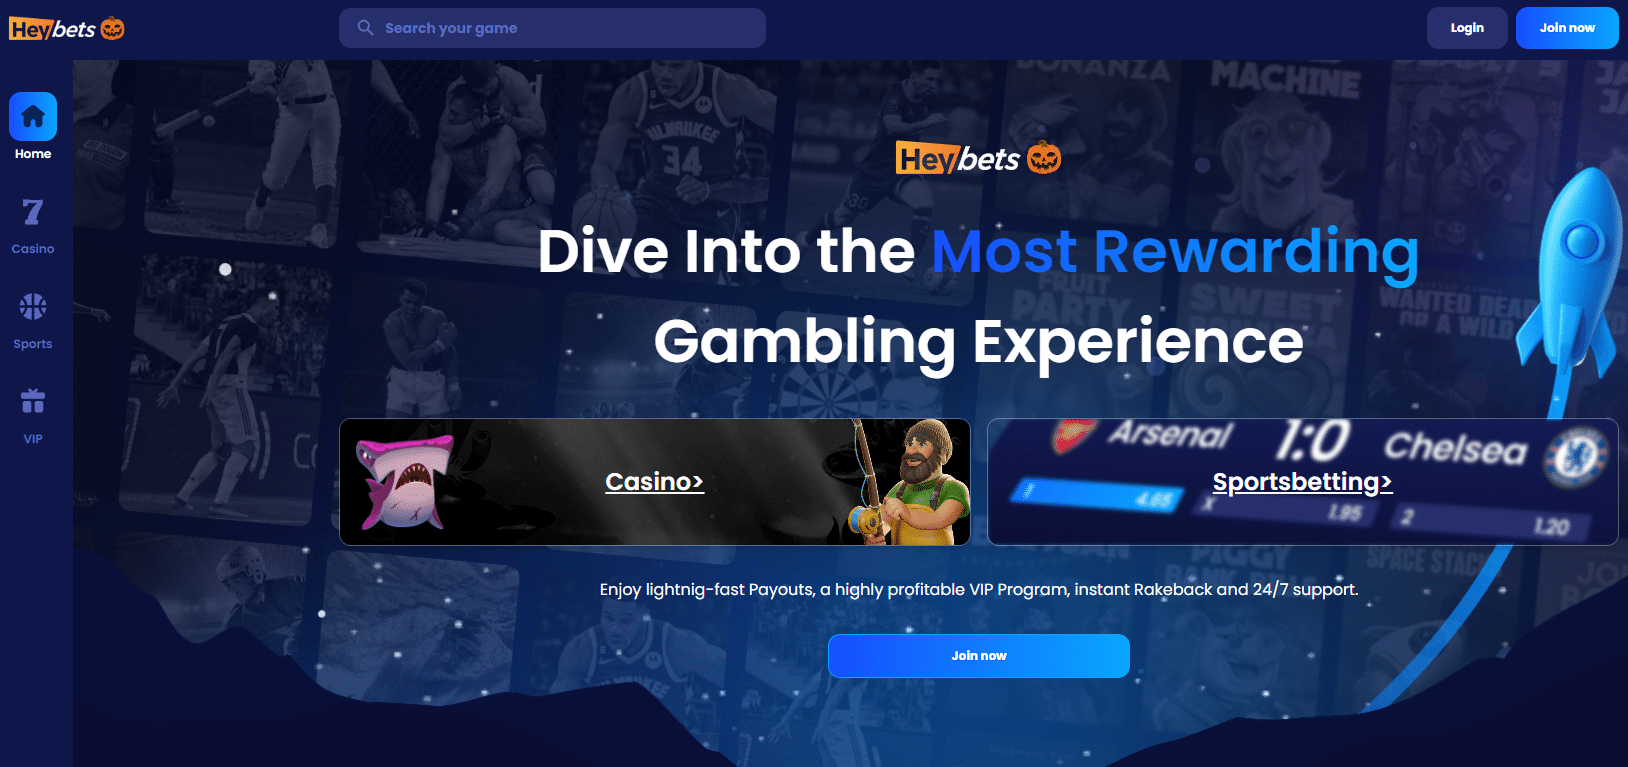 heybets.io instant withdrawal casino